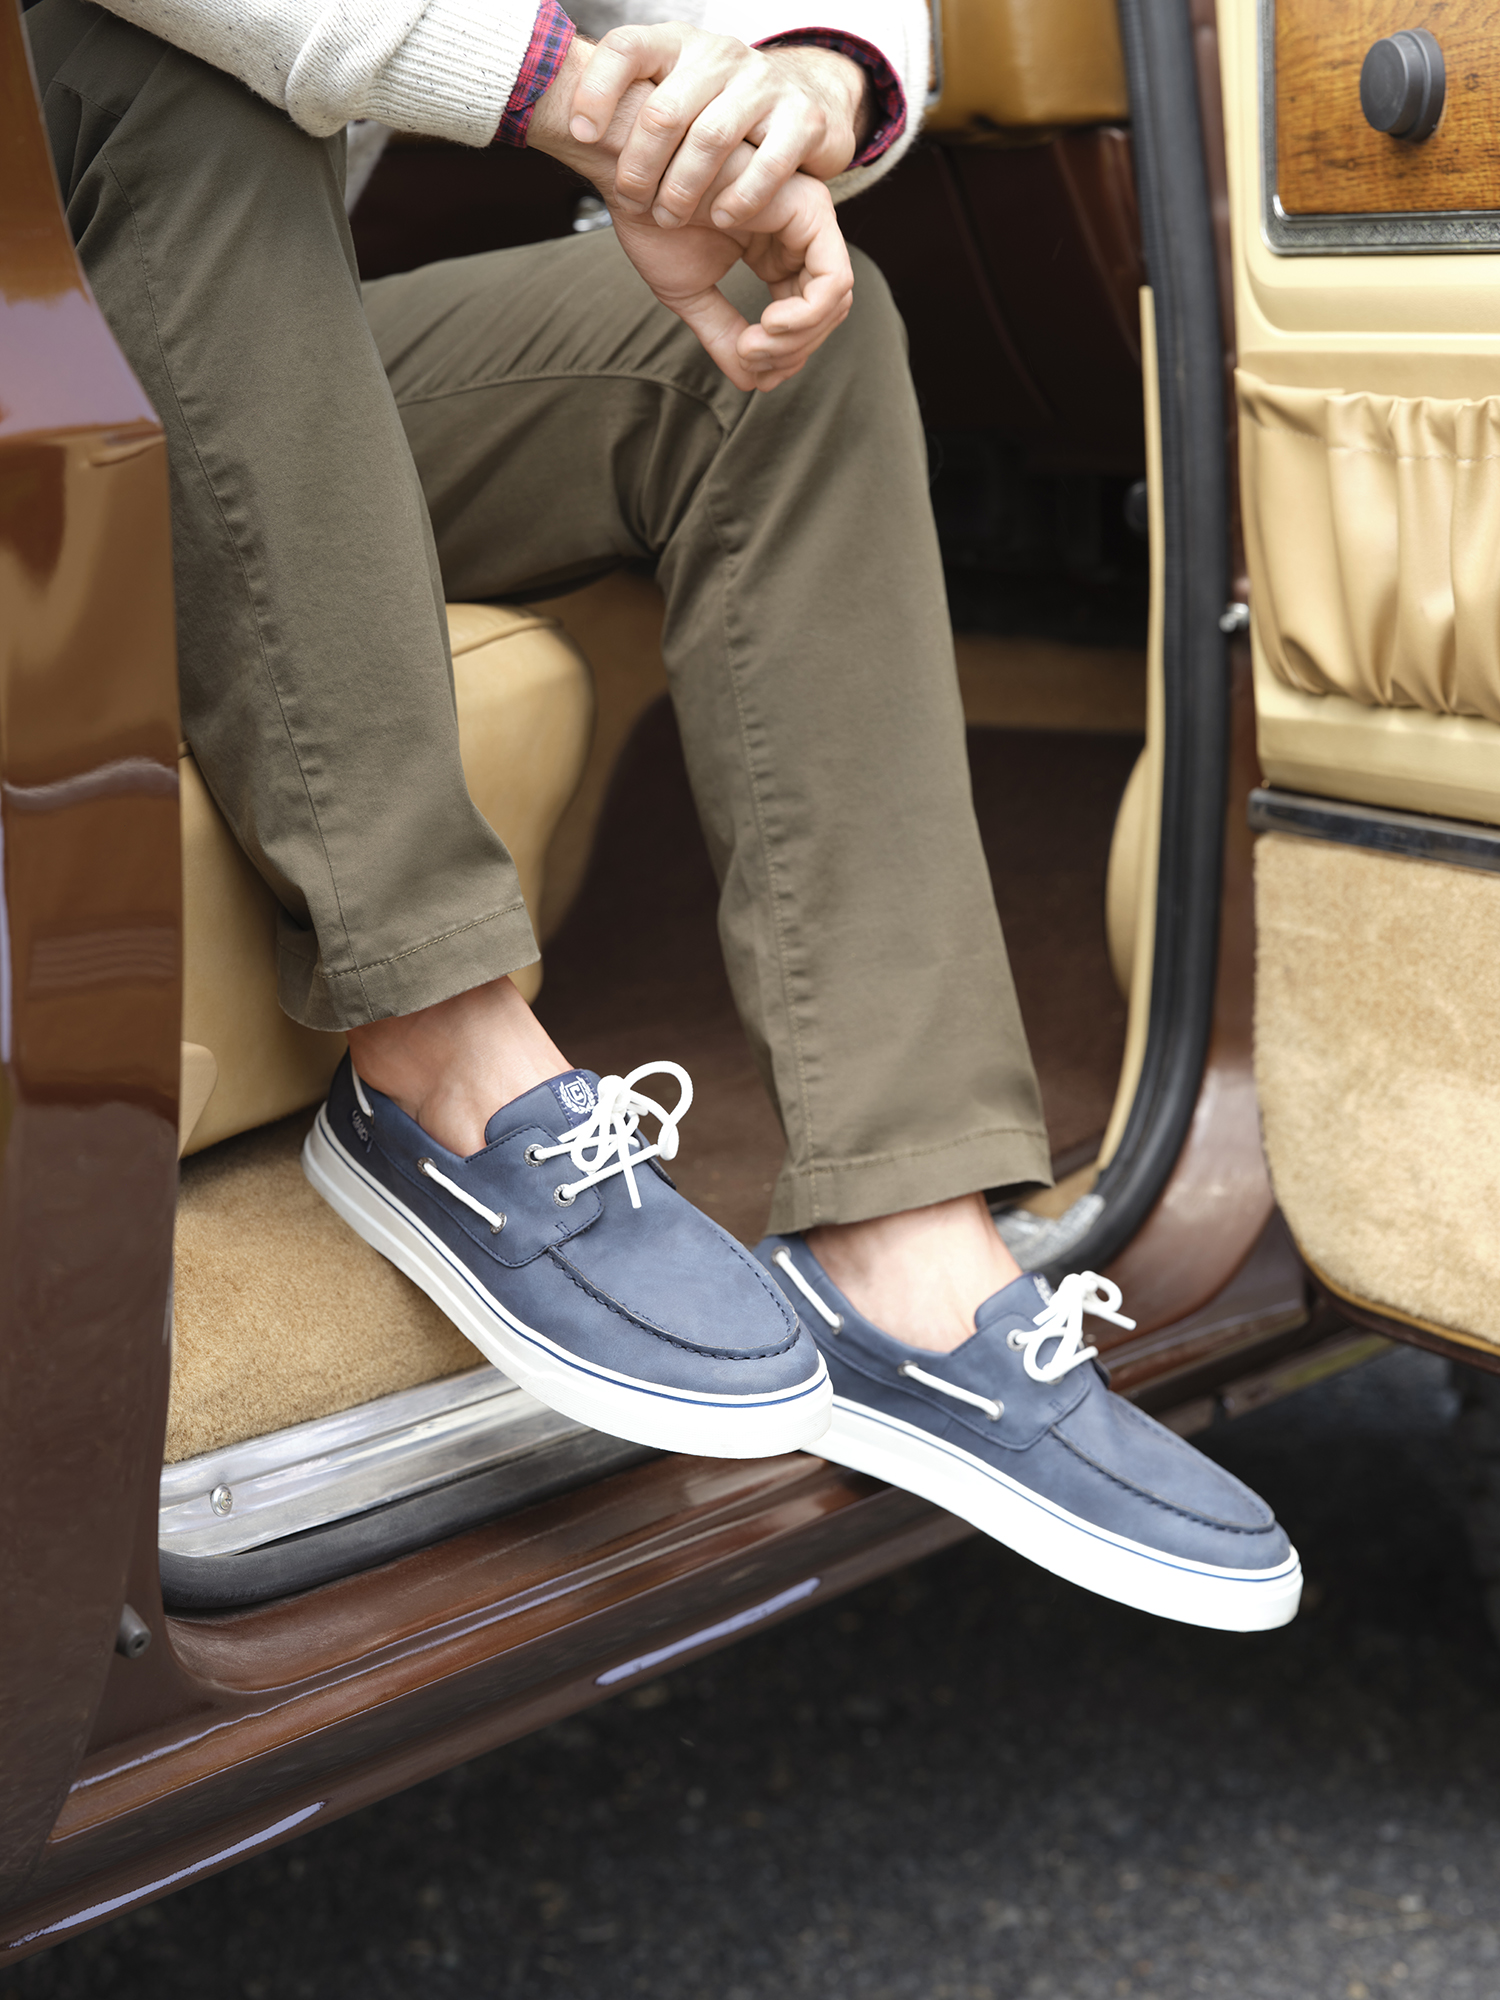 Chaps Mens Casual Dock Boat Shoe - image 3 of 7